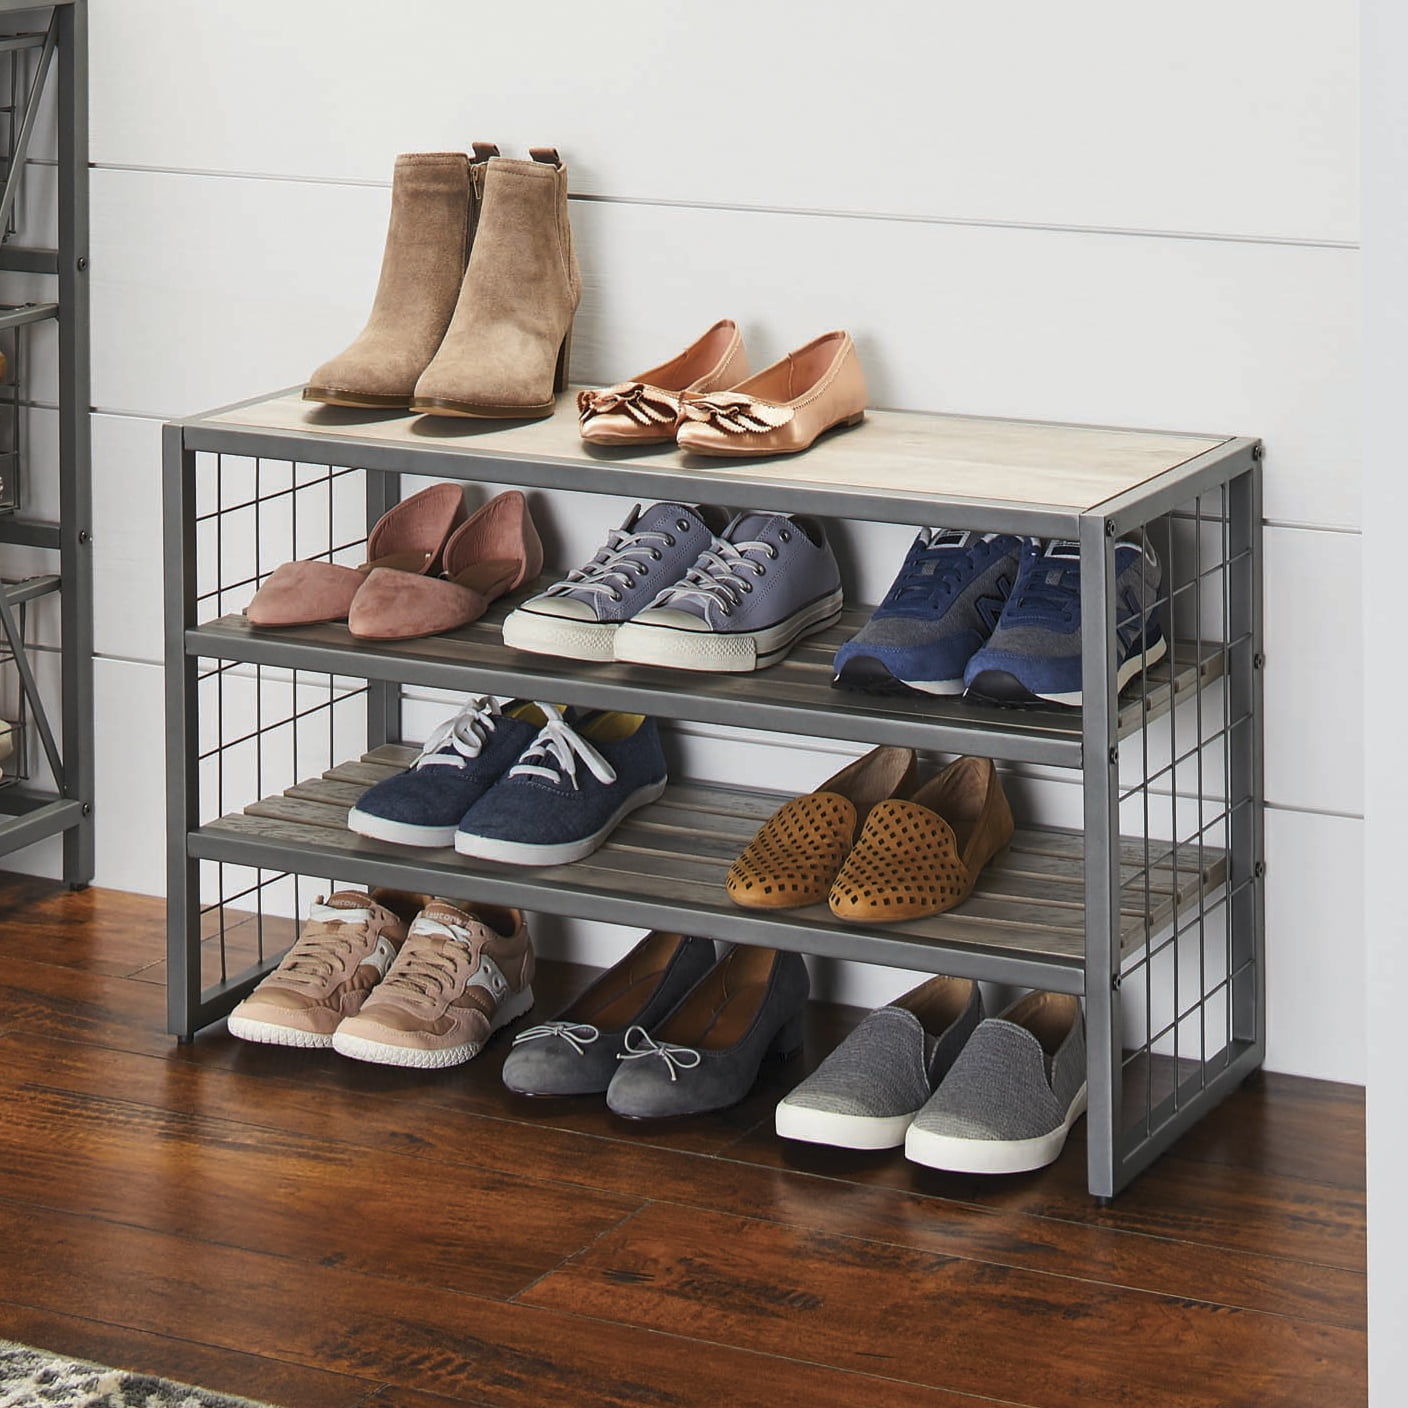 Better Homes & Gardens Farmhouse 3 Tiers,12-Compartment Garment Shoe Rack wood, Gray